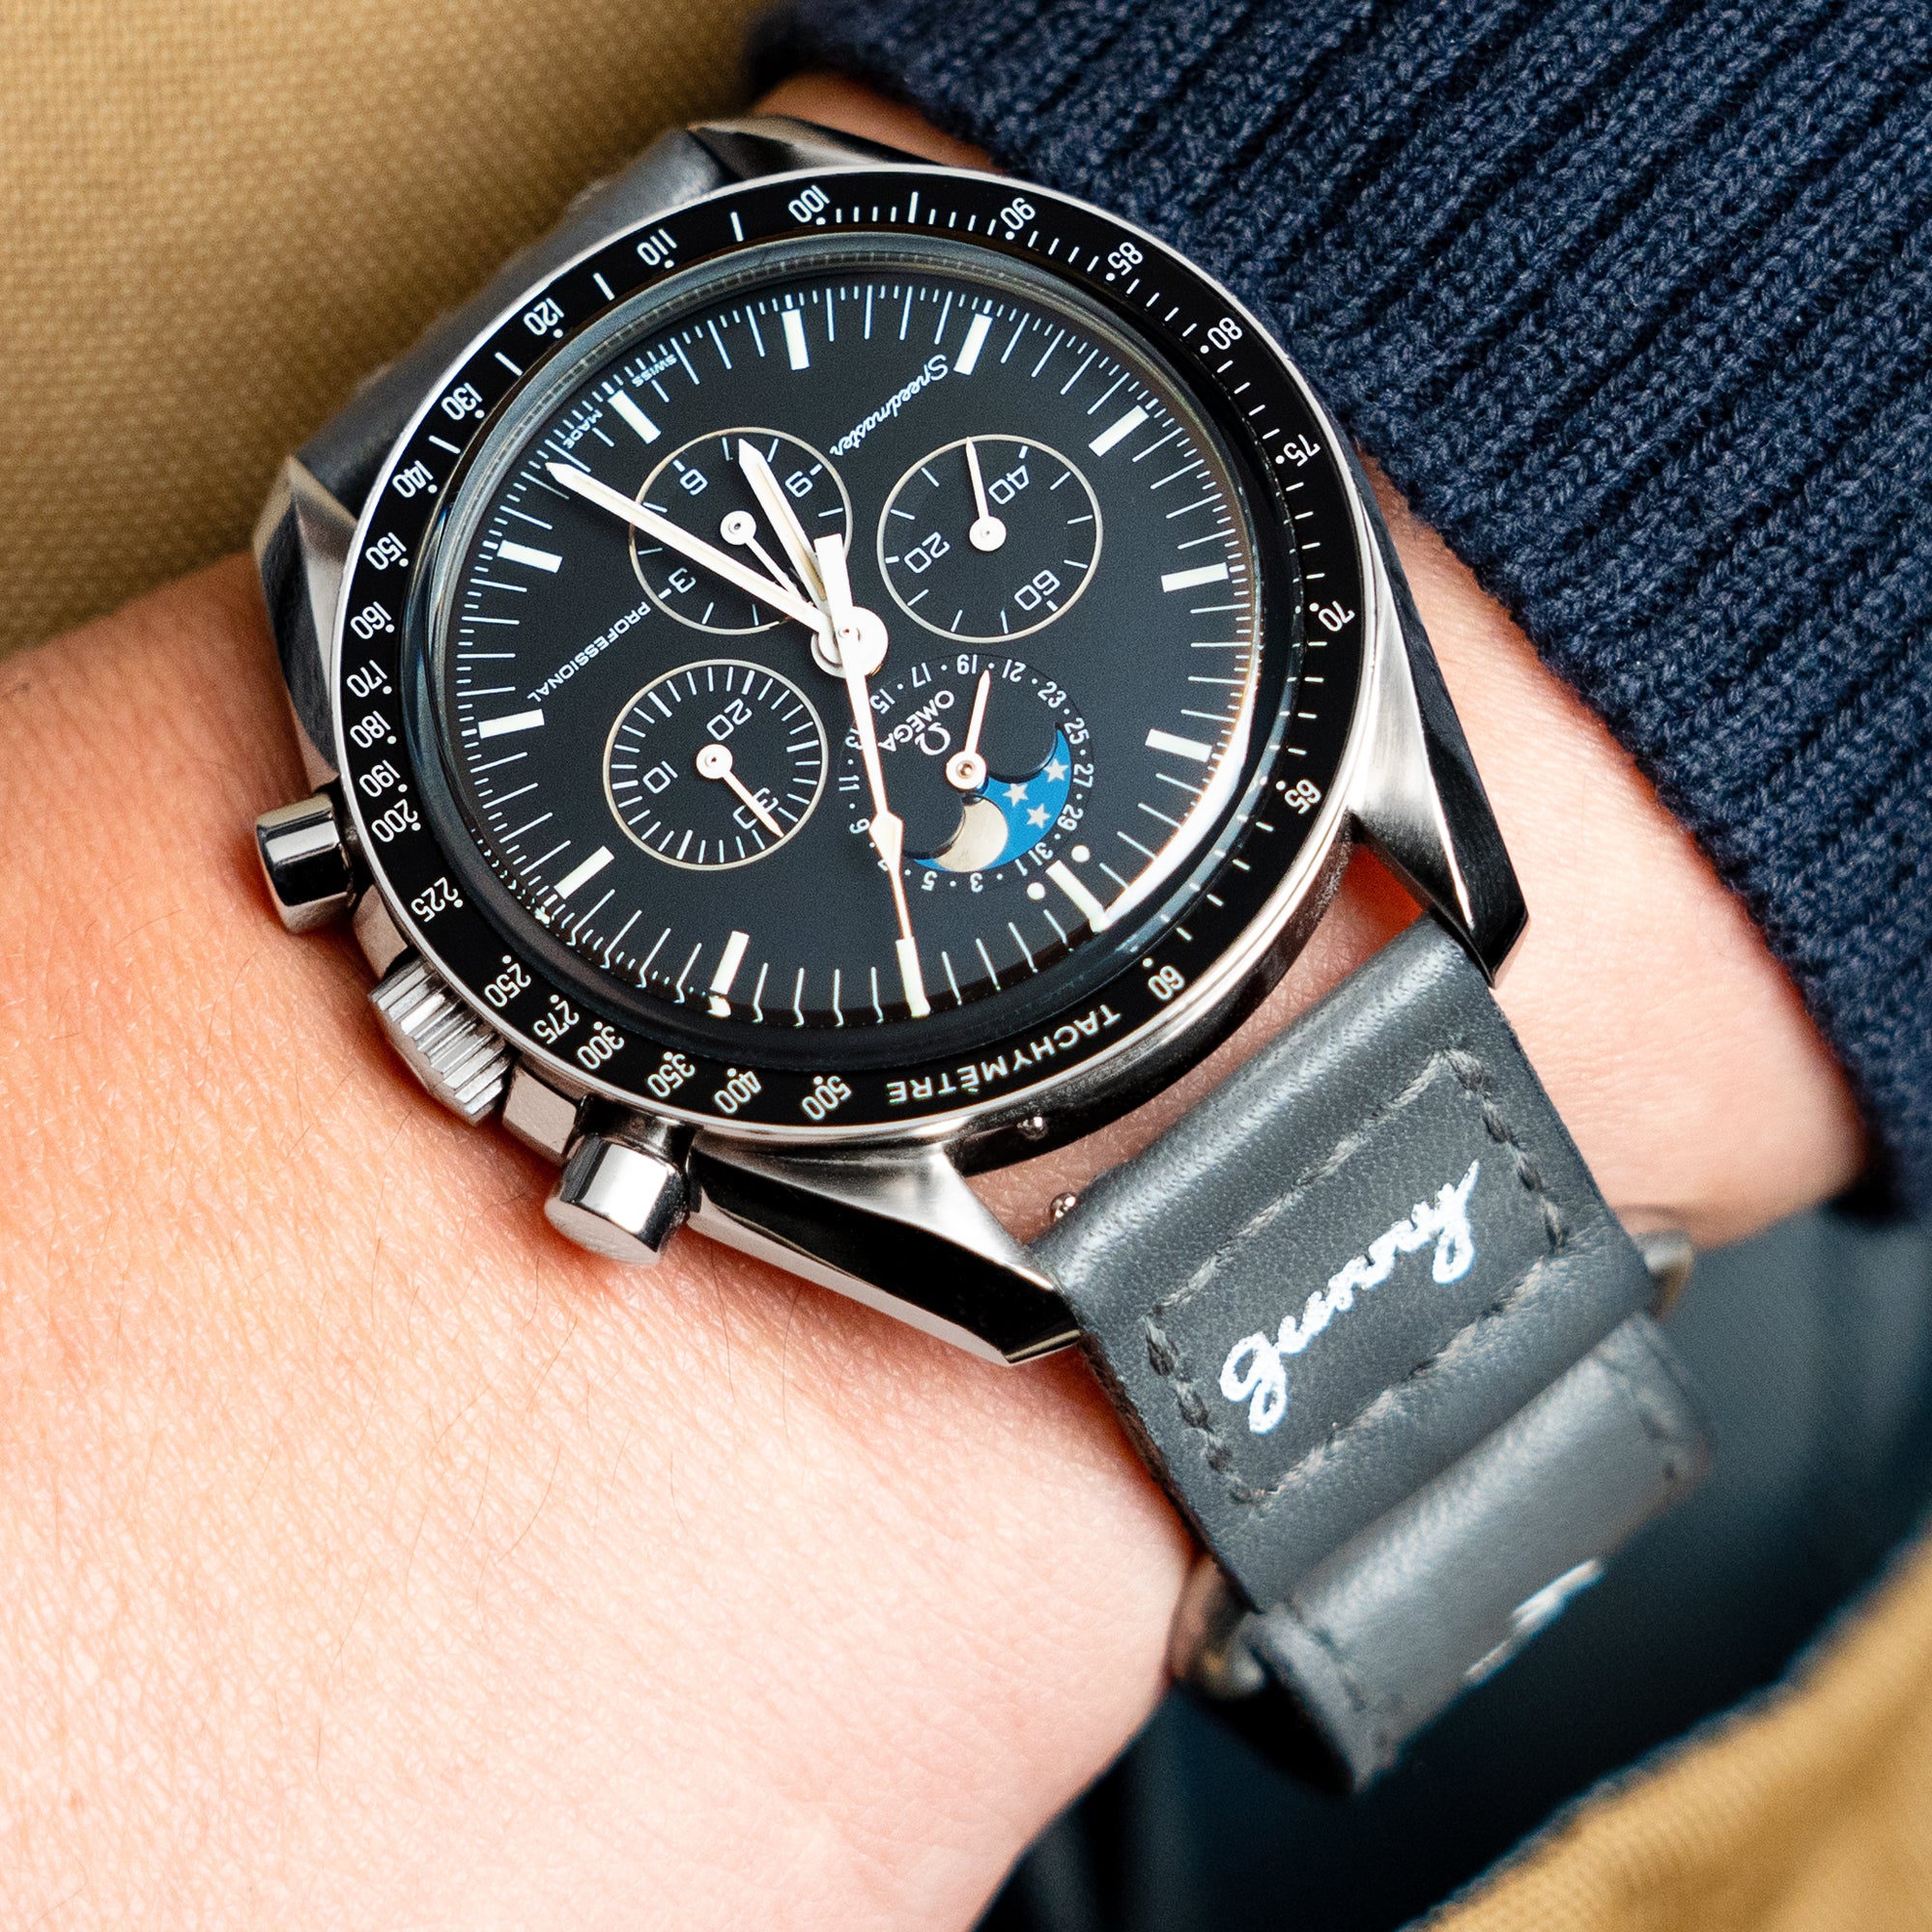 Omega Speedmaster Professional Moonphase - The watch to have gracefully carried on the Baton